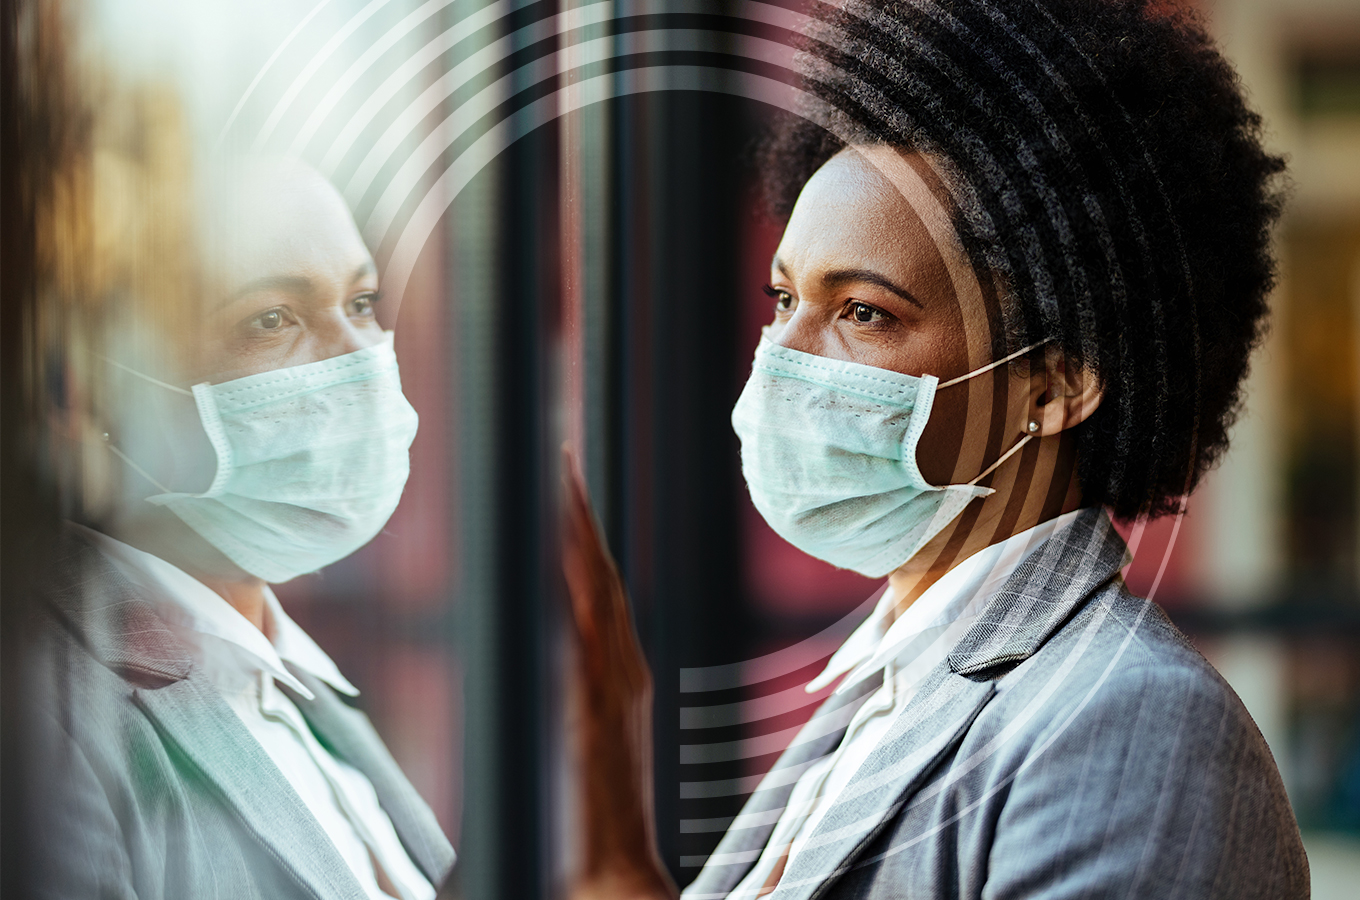 A woman looks thoughtful. She wears a medical mask and a business suit. Her reflection can been seen in a glass wall.